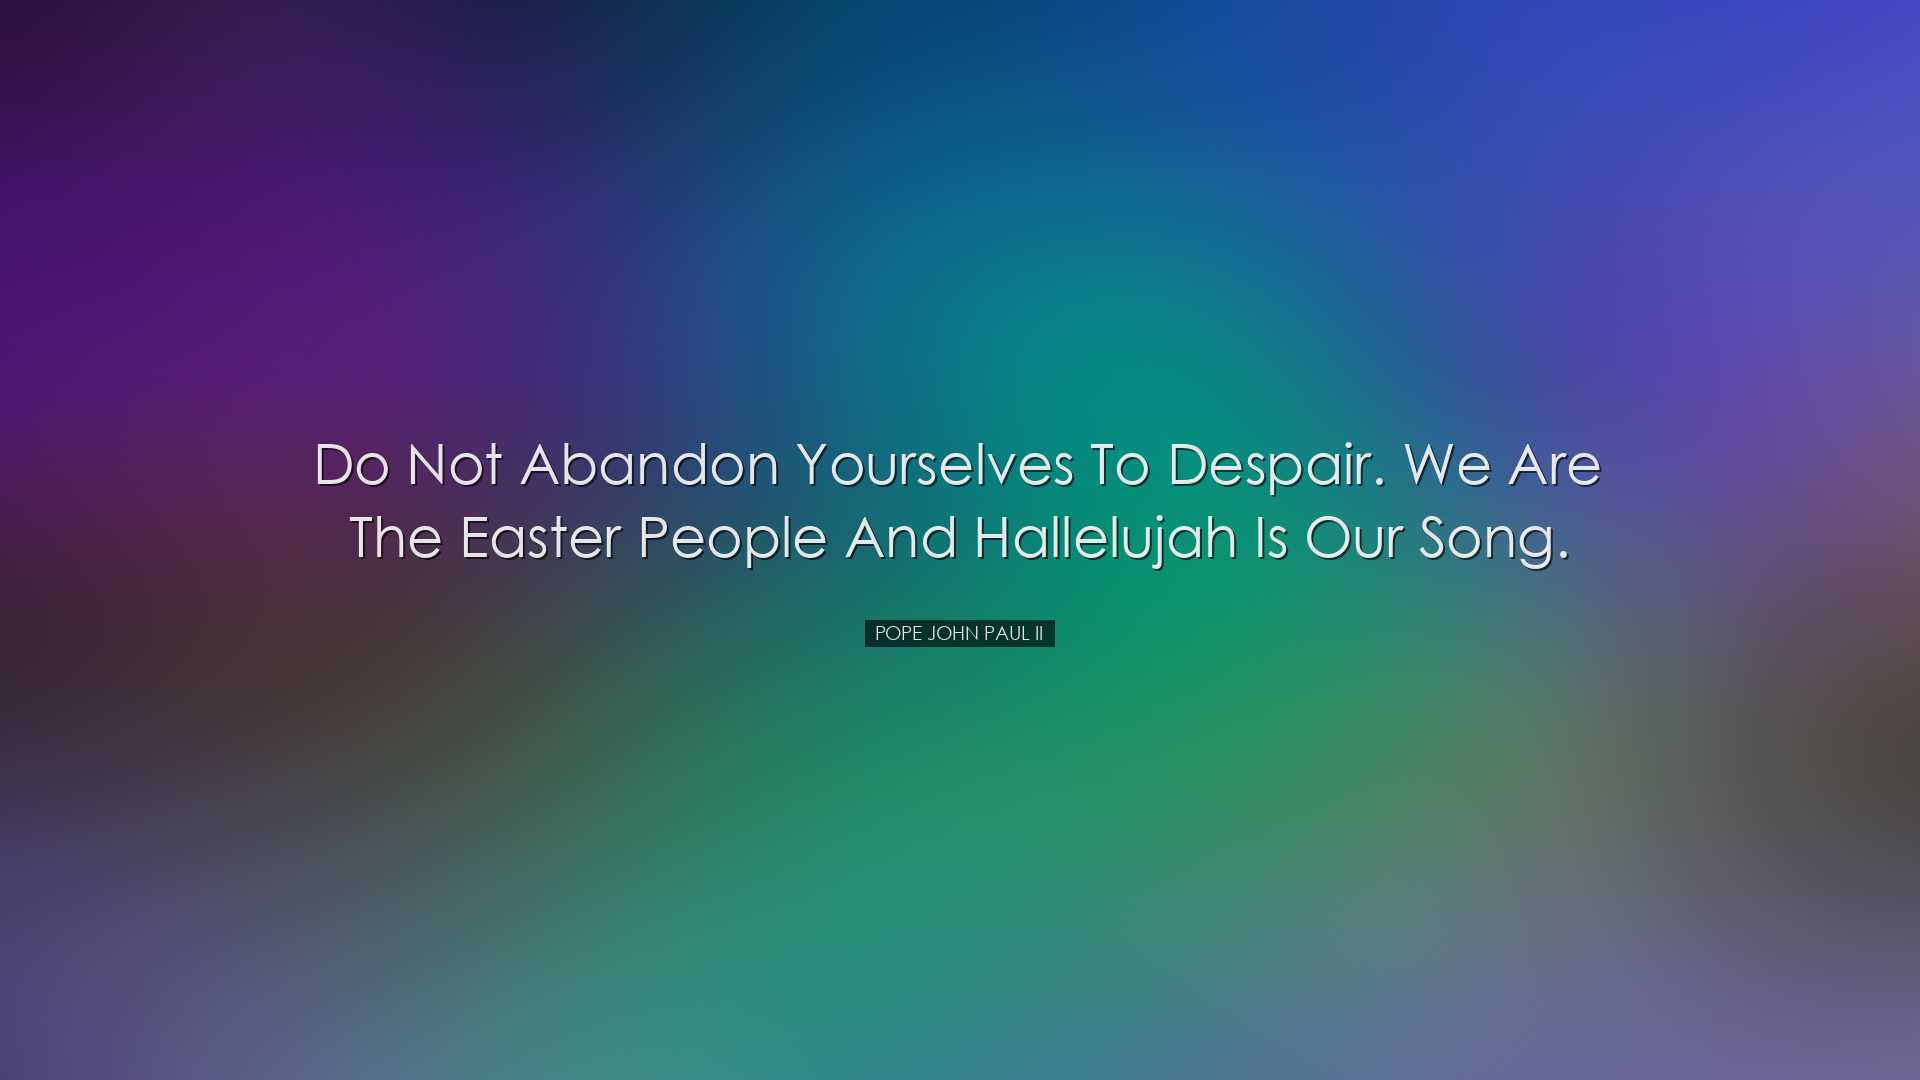 Do not abandon yourselves to despair. We are the Easter people and